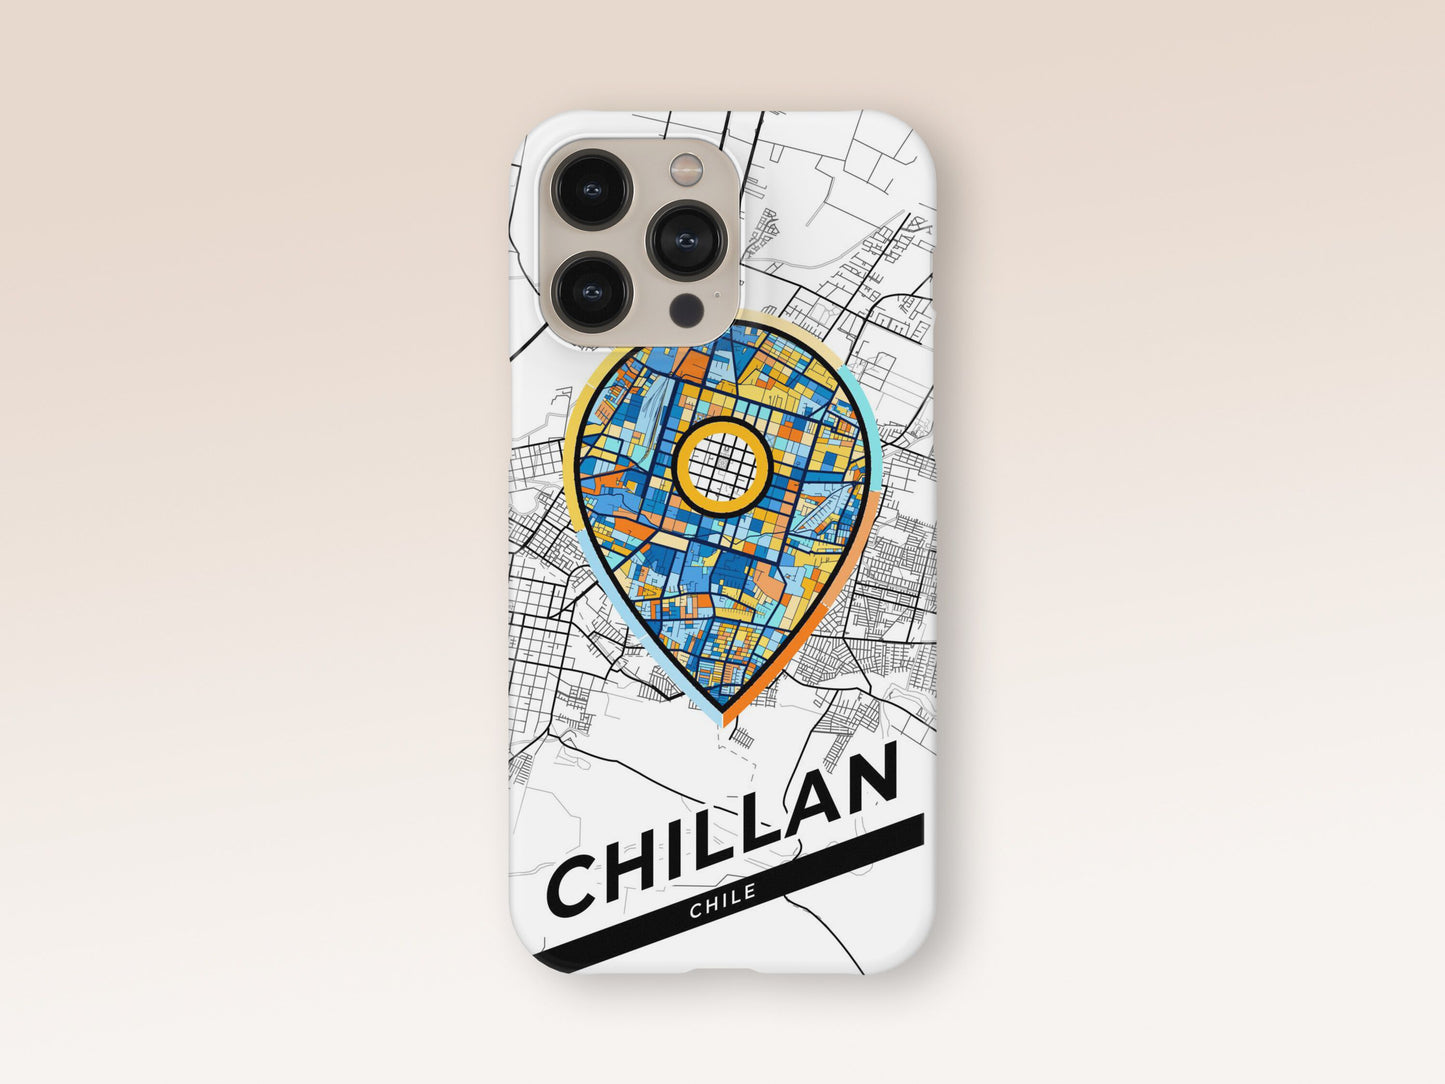 Chillan Chile slim phone case with colorful icon. Birthday, wedding or housewarming gift. Couple match cases. 1